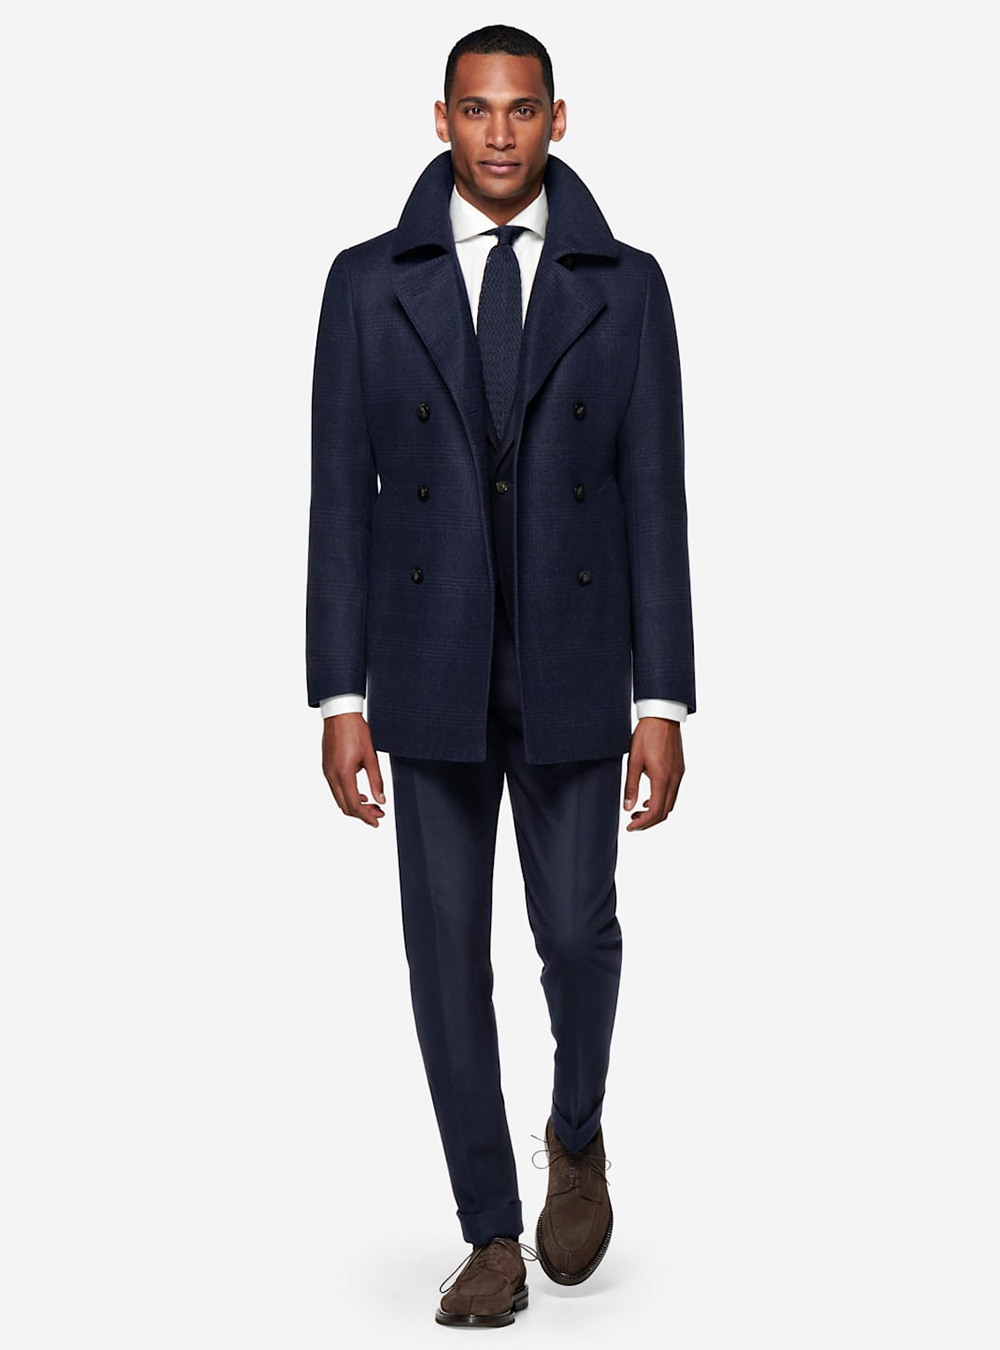 navy peacoat, navy suit, white shirt, and navy tie